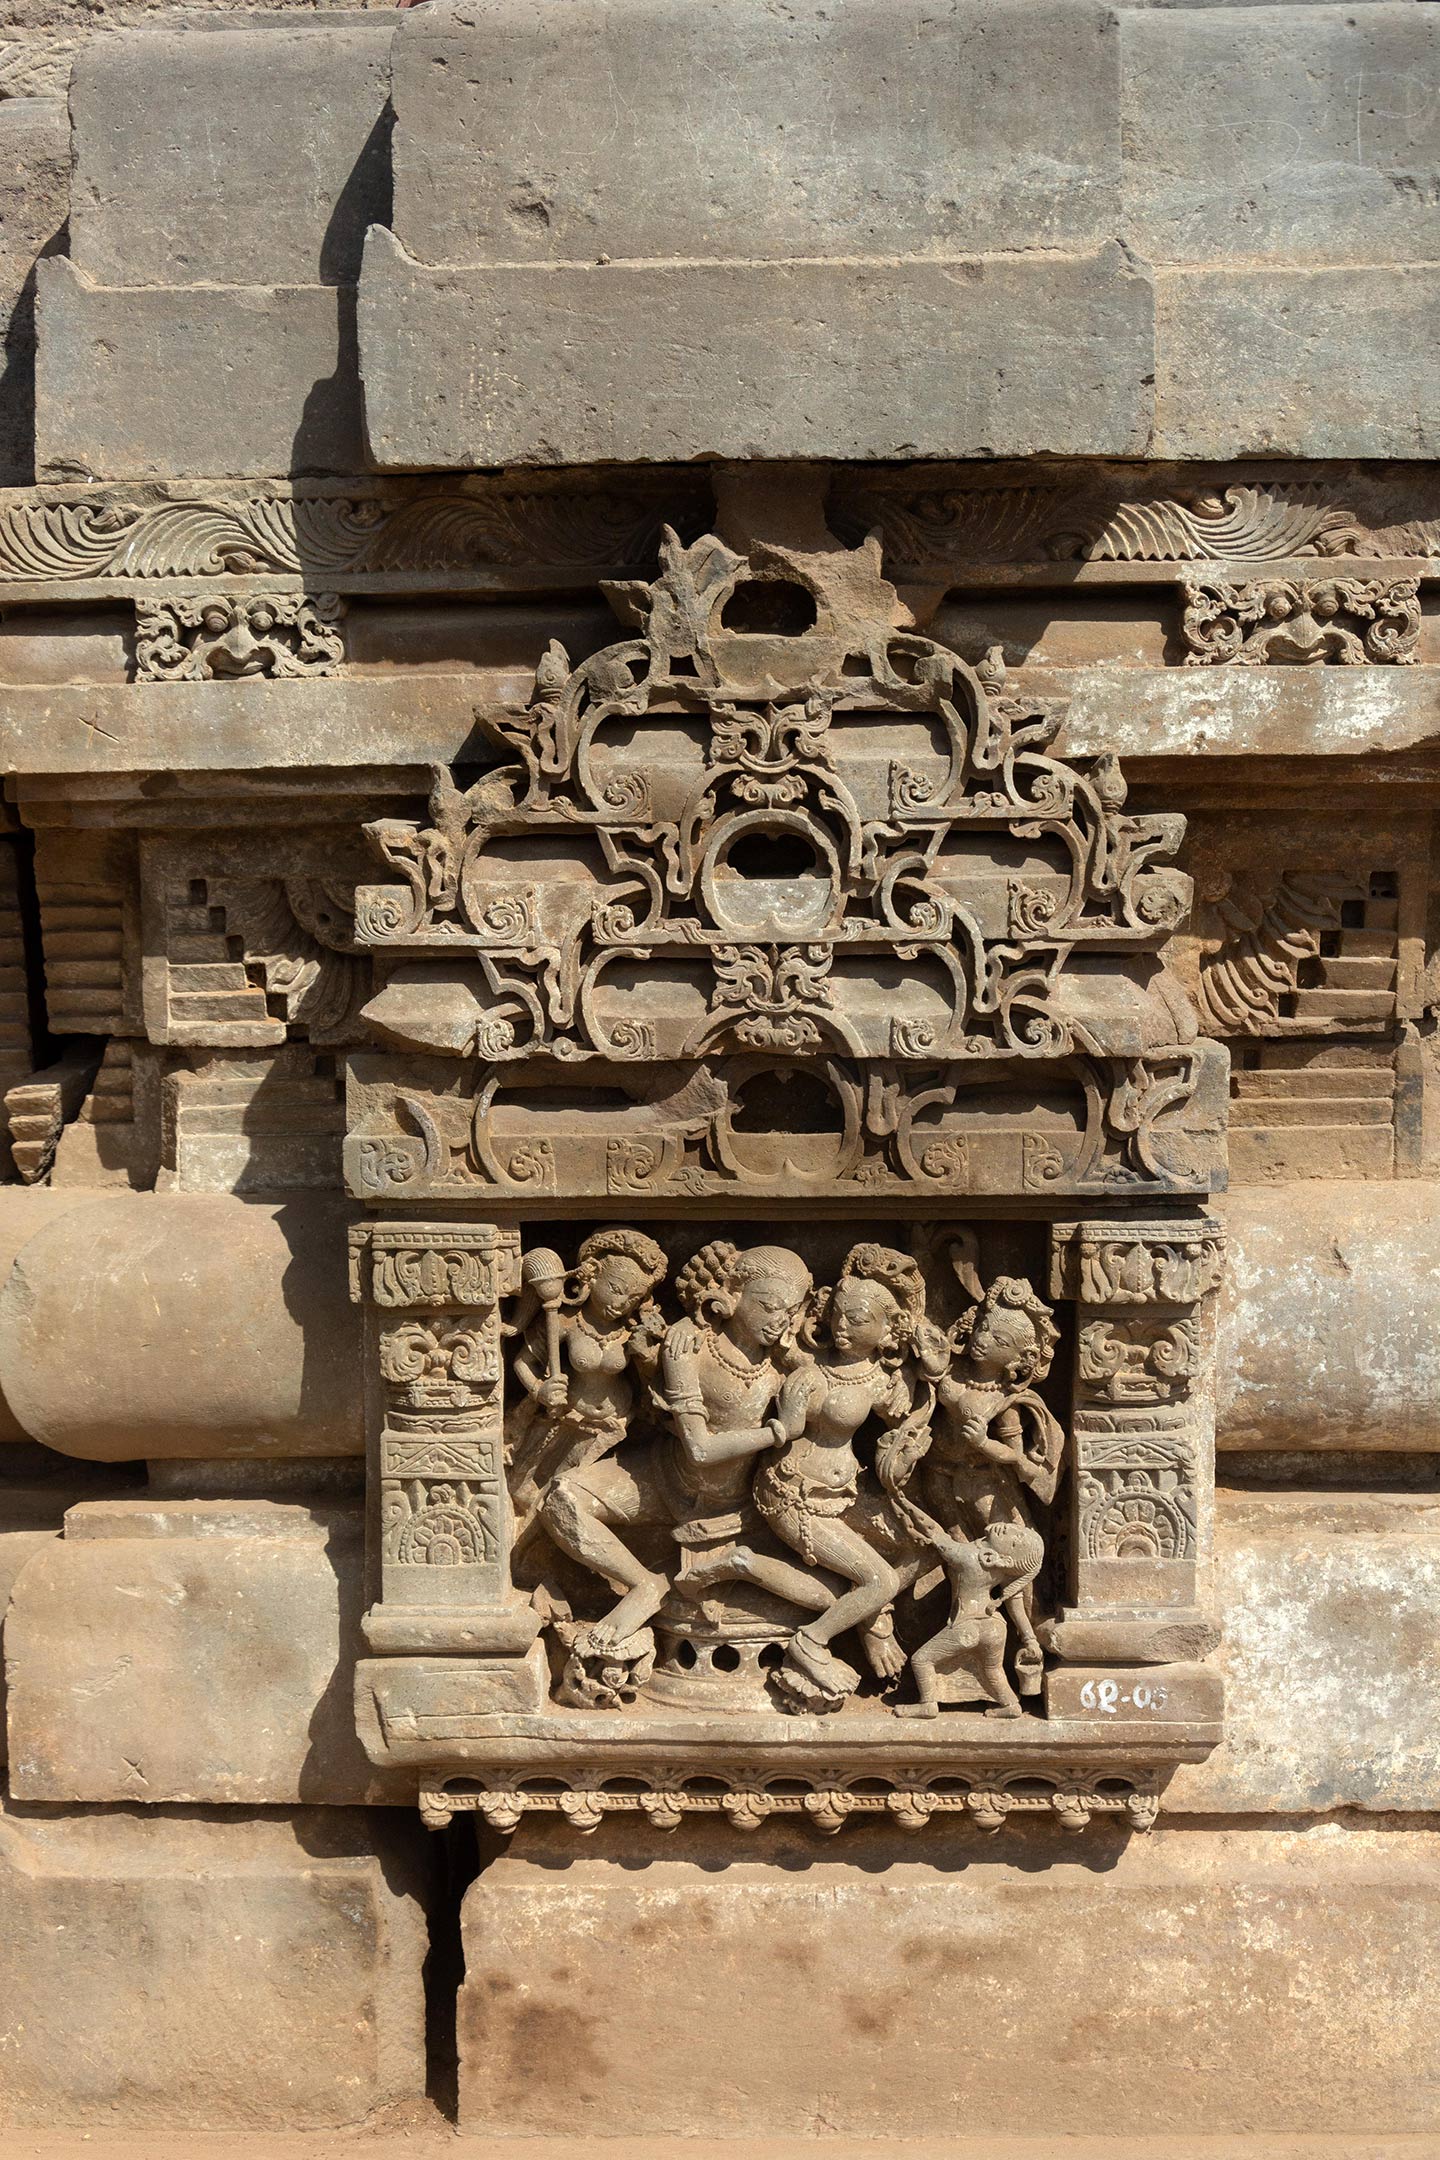 Couples invoking shringara rasa (associated with romance, love, and attractiveness between lovers) are framed in panels with pillars and tiered shikhara with gavaksha (horseshoe) motifs. Unlike in other parts of the temple, the faces are not damaged and they wear heavy jewellery, elaborate headgear, and garments, indicating they belong to royalty or a high social class.